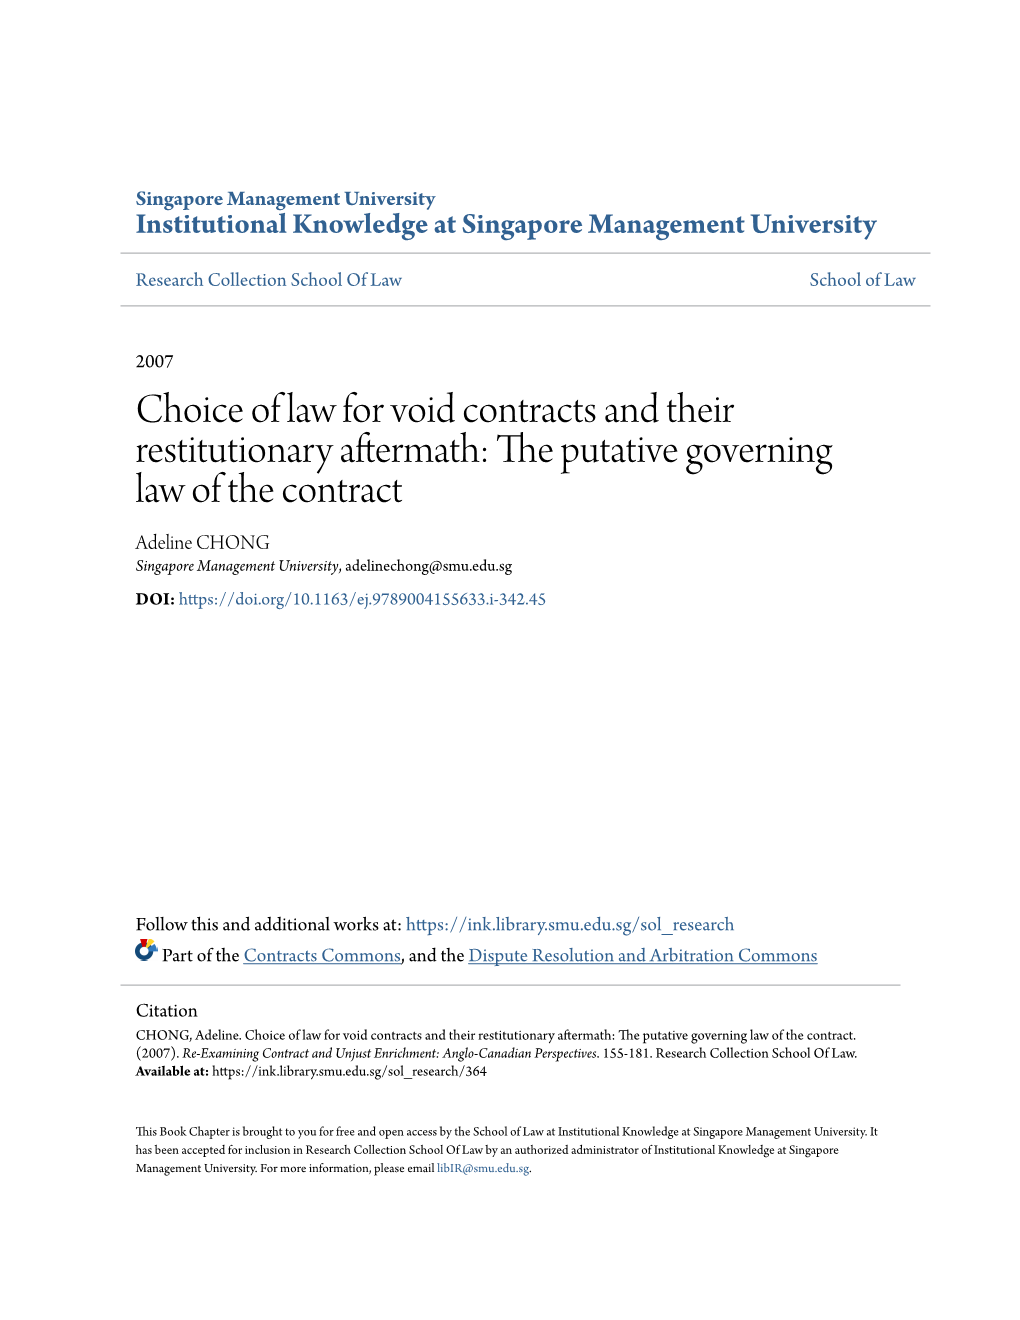 Choice of Law for Void Contracts and Their Restitutionary Aftermath